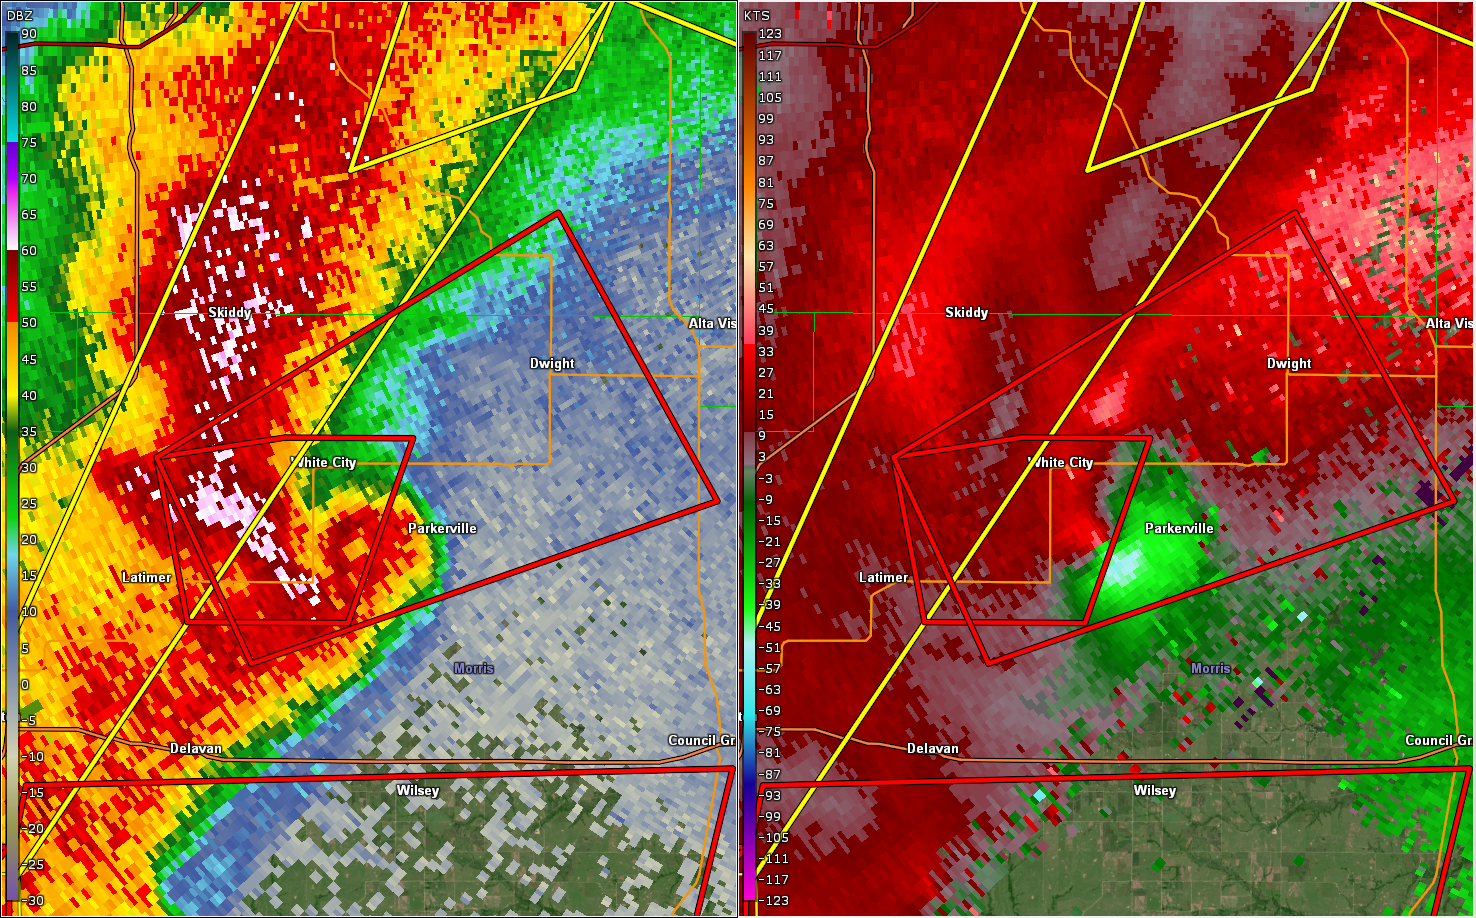 Radar at 8:25pm, near the end of tornado #4 just southwest of Parkerville.